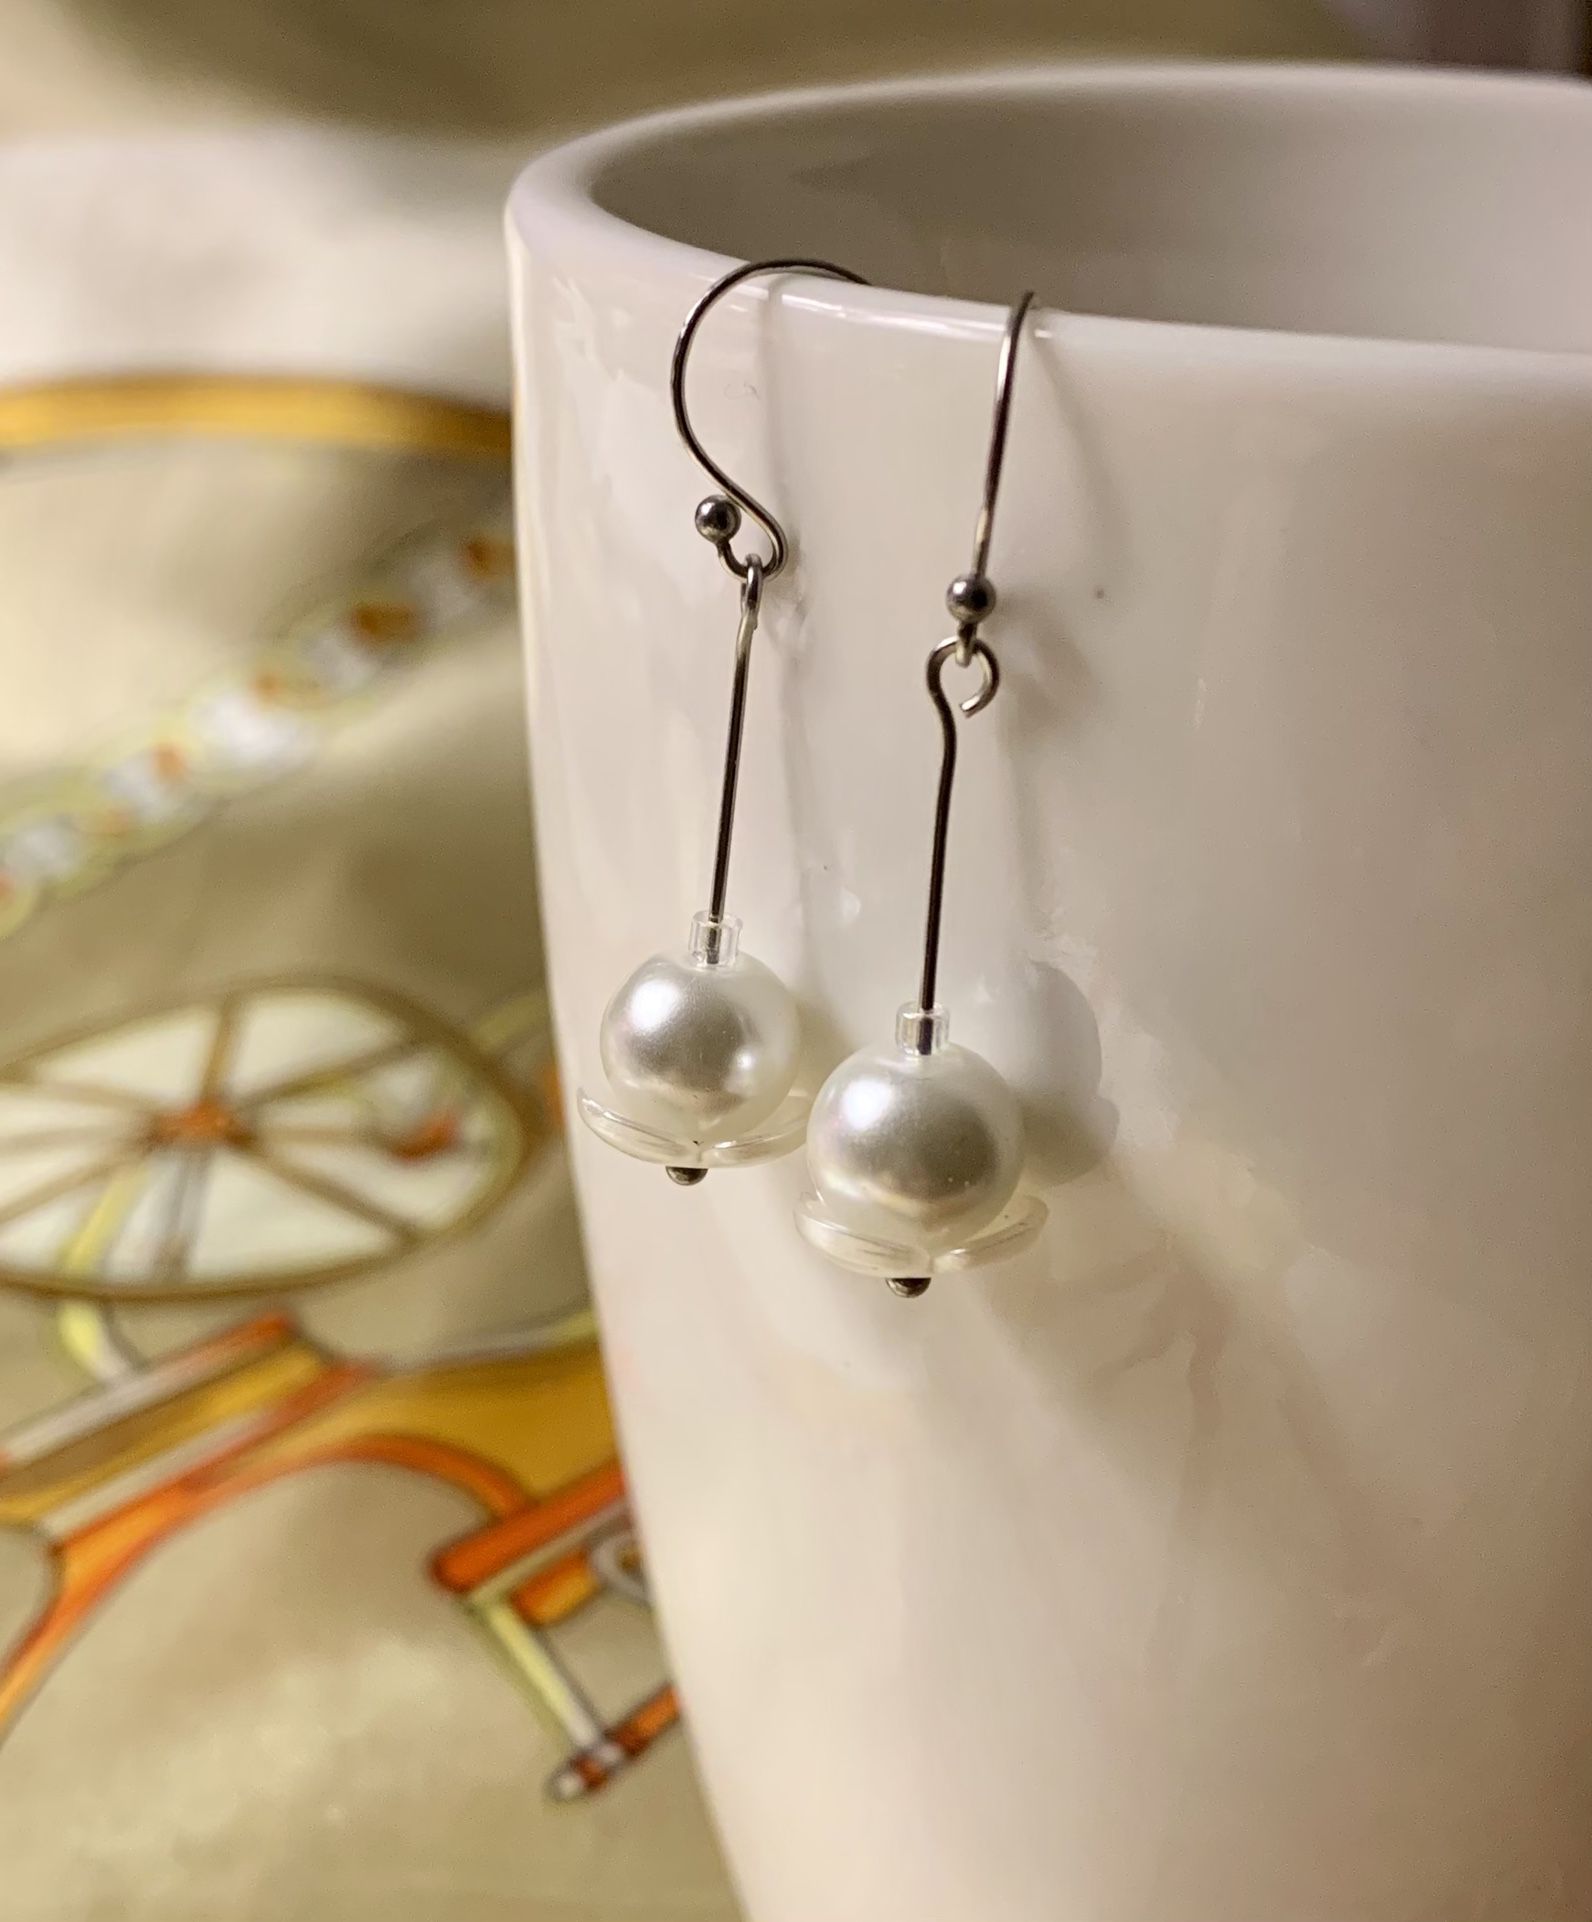 *New* Pure 925 Silver With Faux Pearl Flower Dangle Earrings, Simplistic Vintage Design